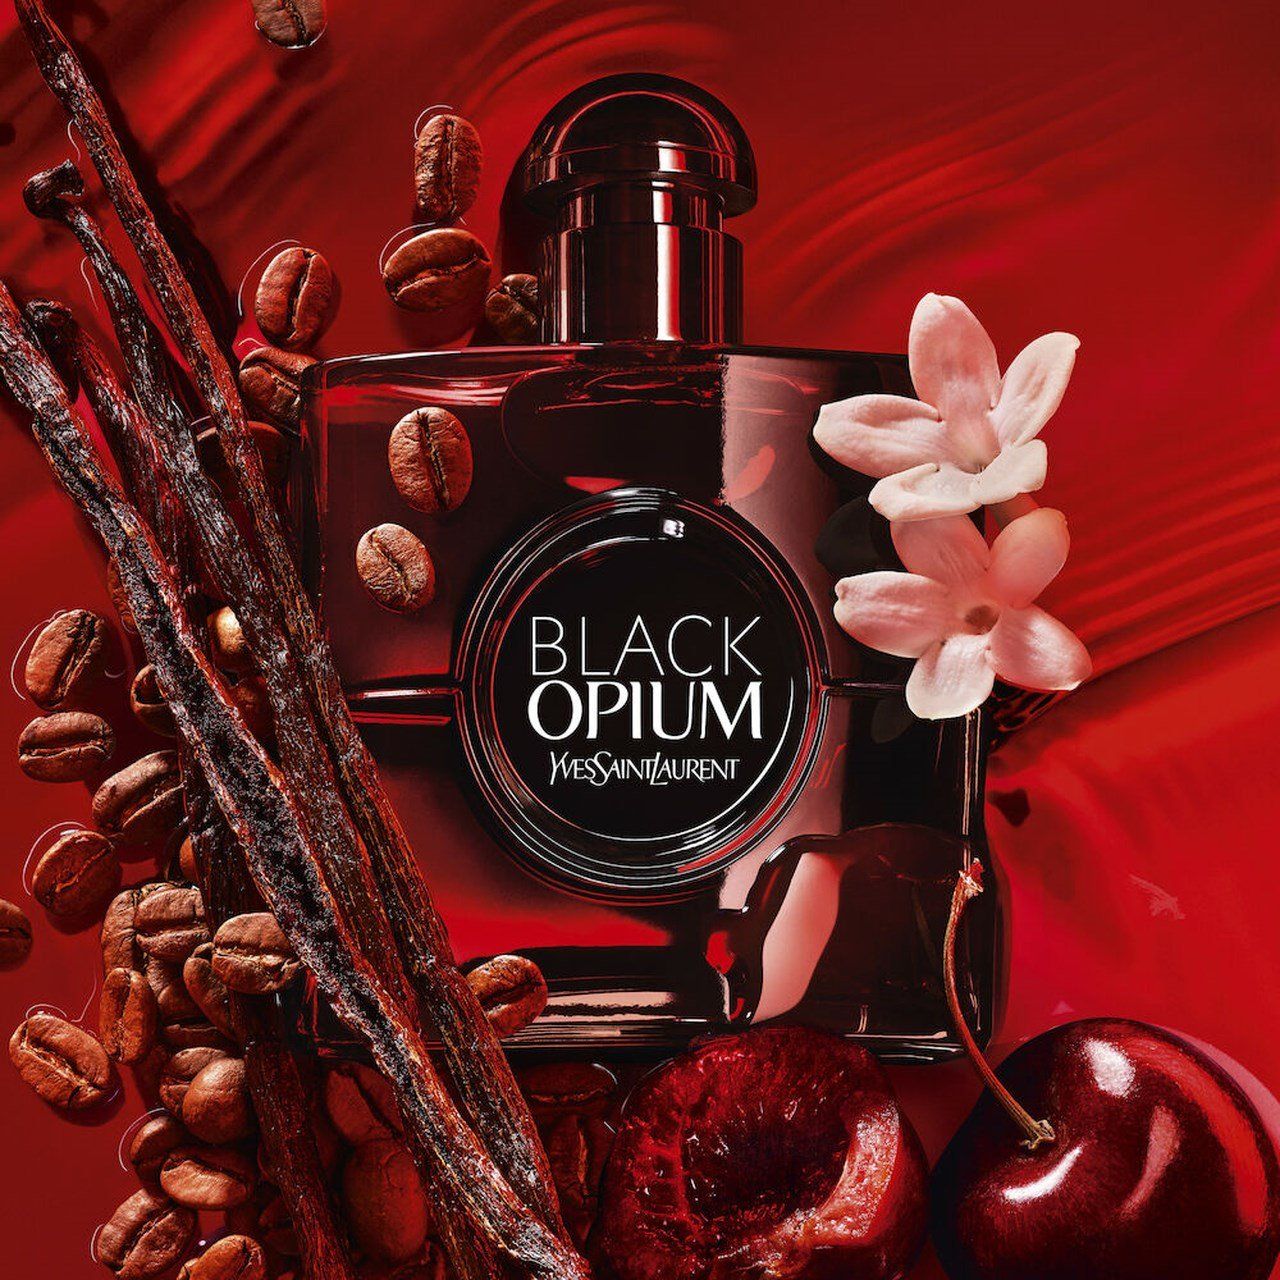 Black Opium Over Red: Dark Chocolate With a Crunch! ~ Fragrance Reviews